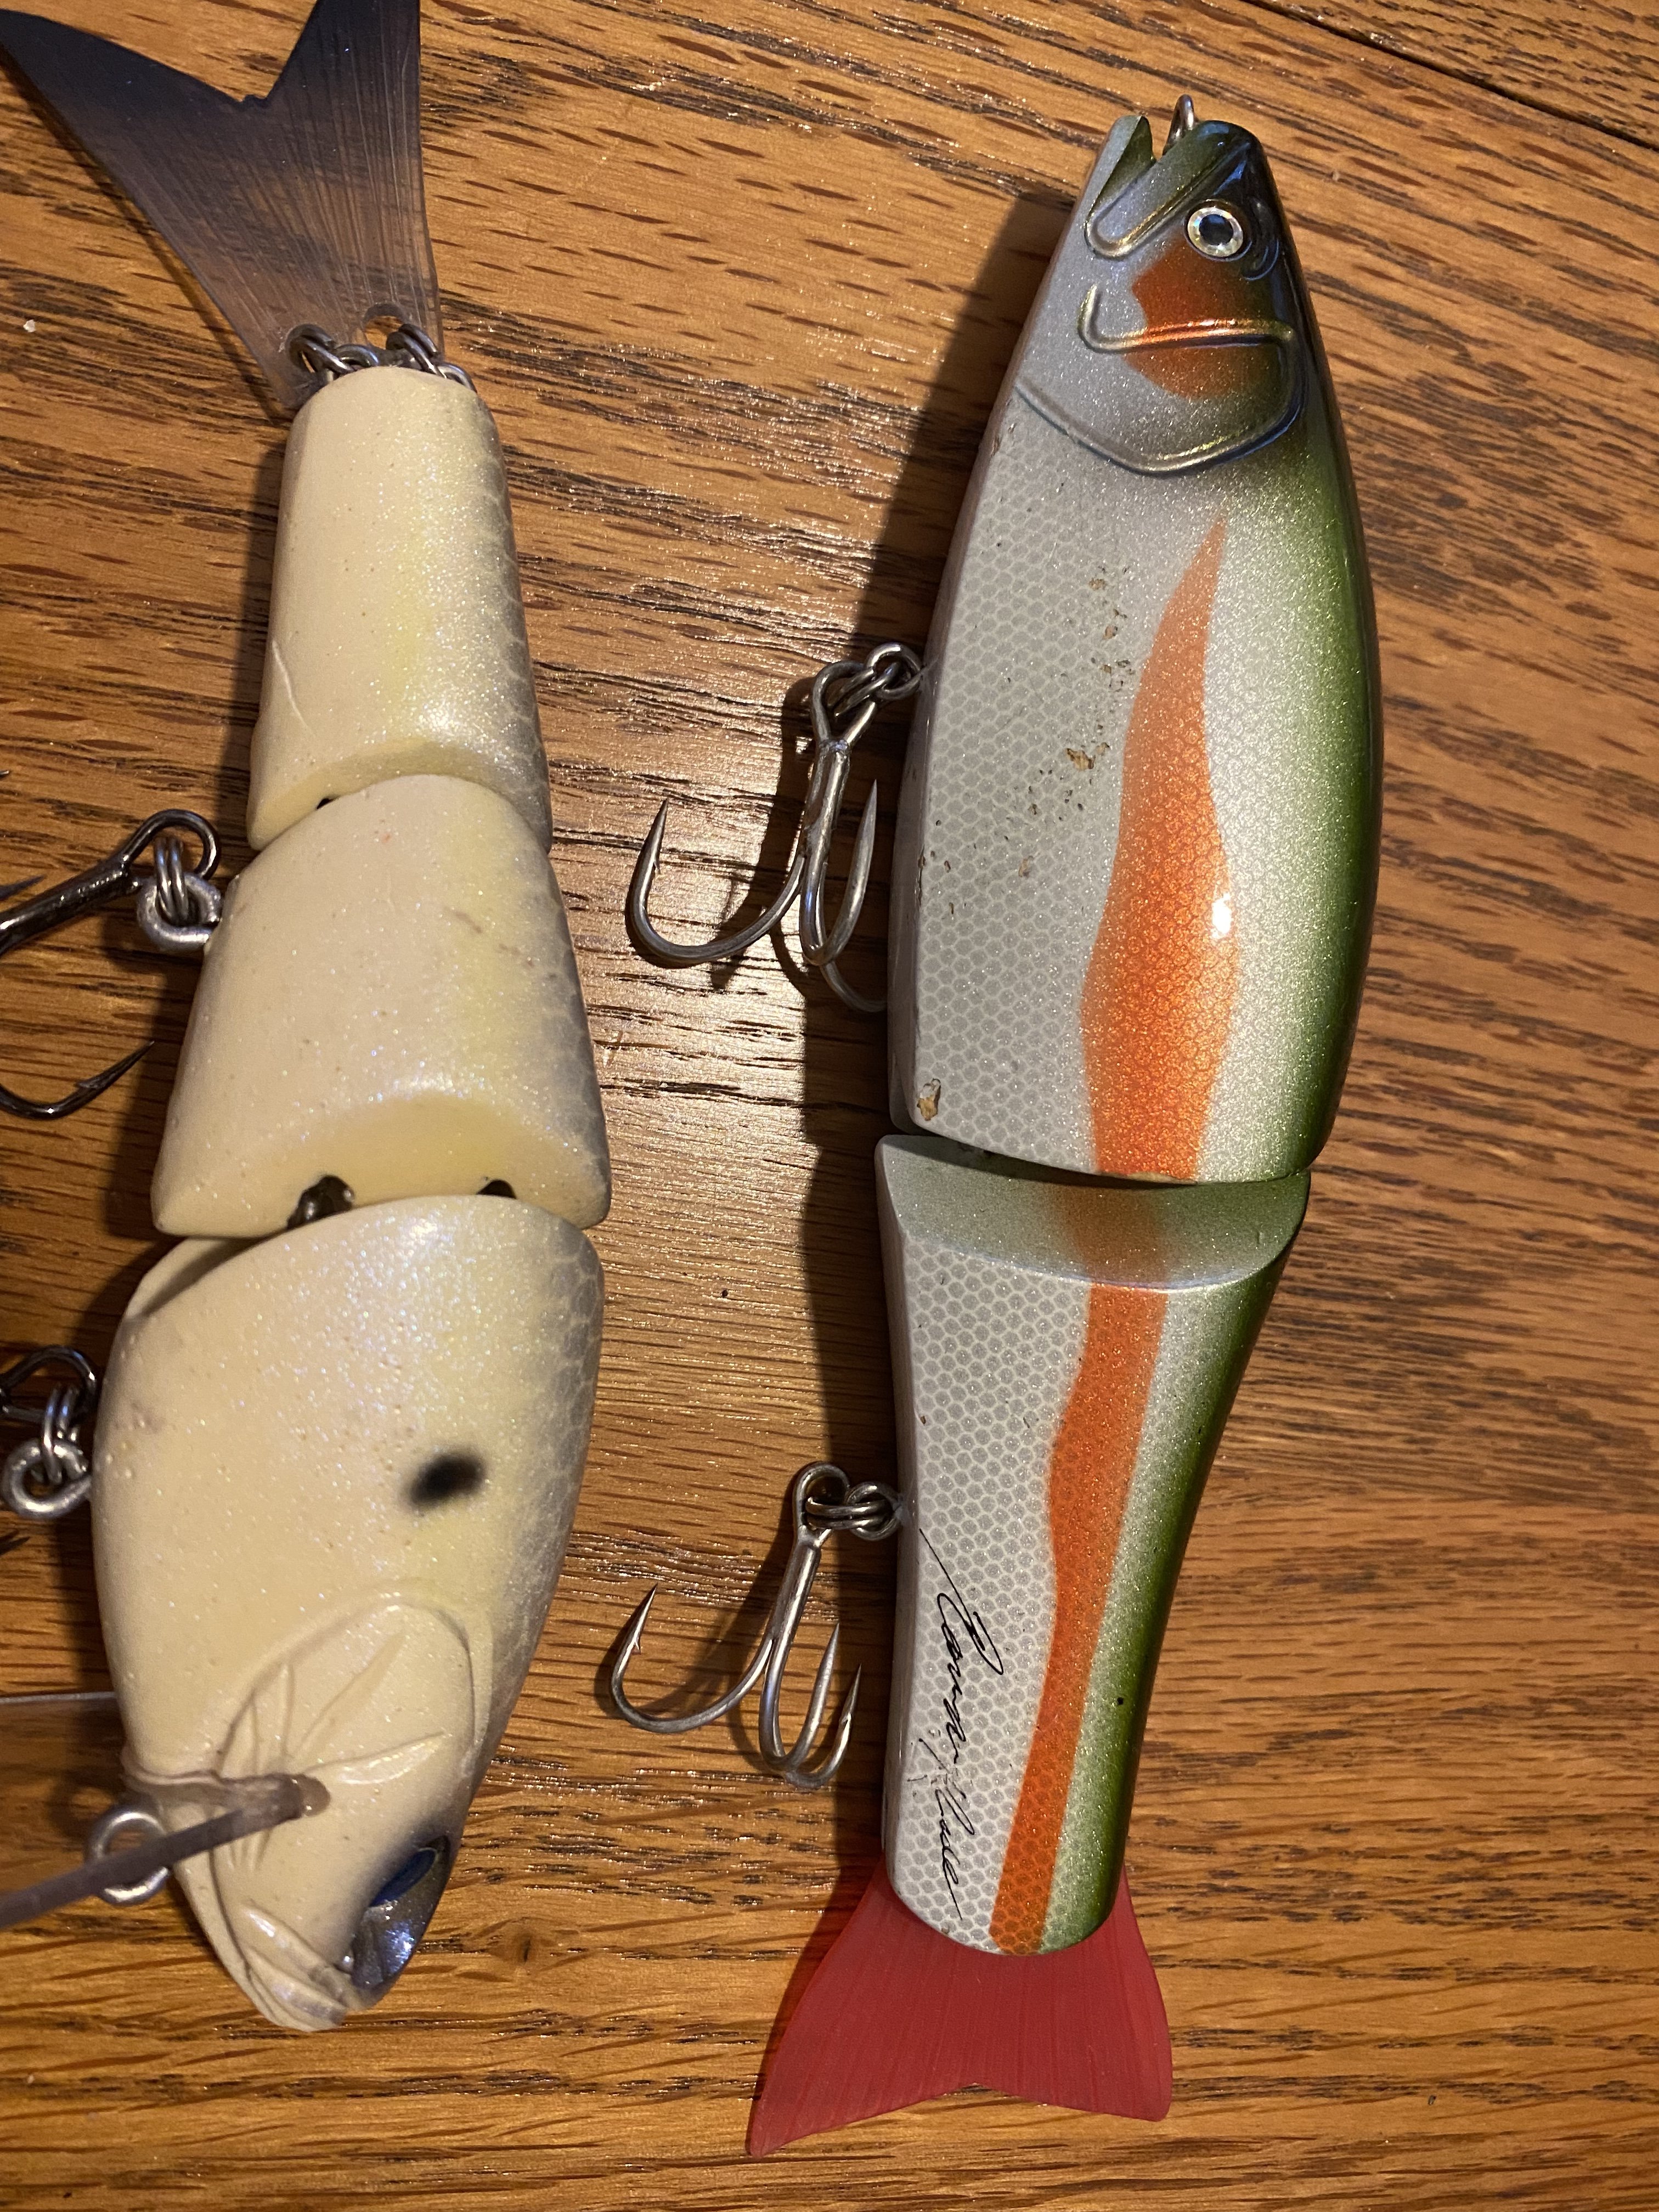 Quad hooks are they a thing? - Member Reviews - Swimbait Underground